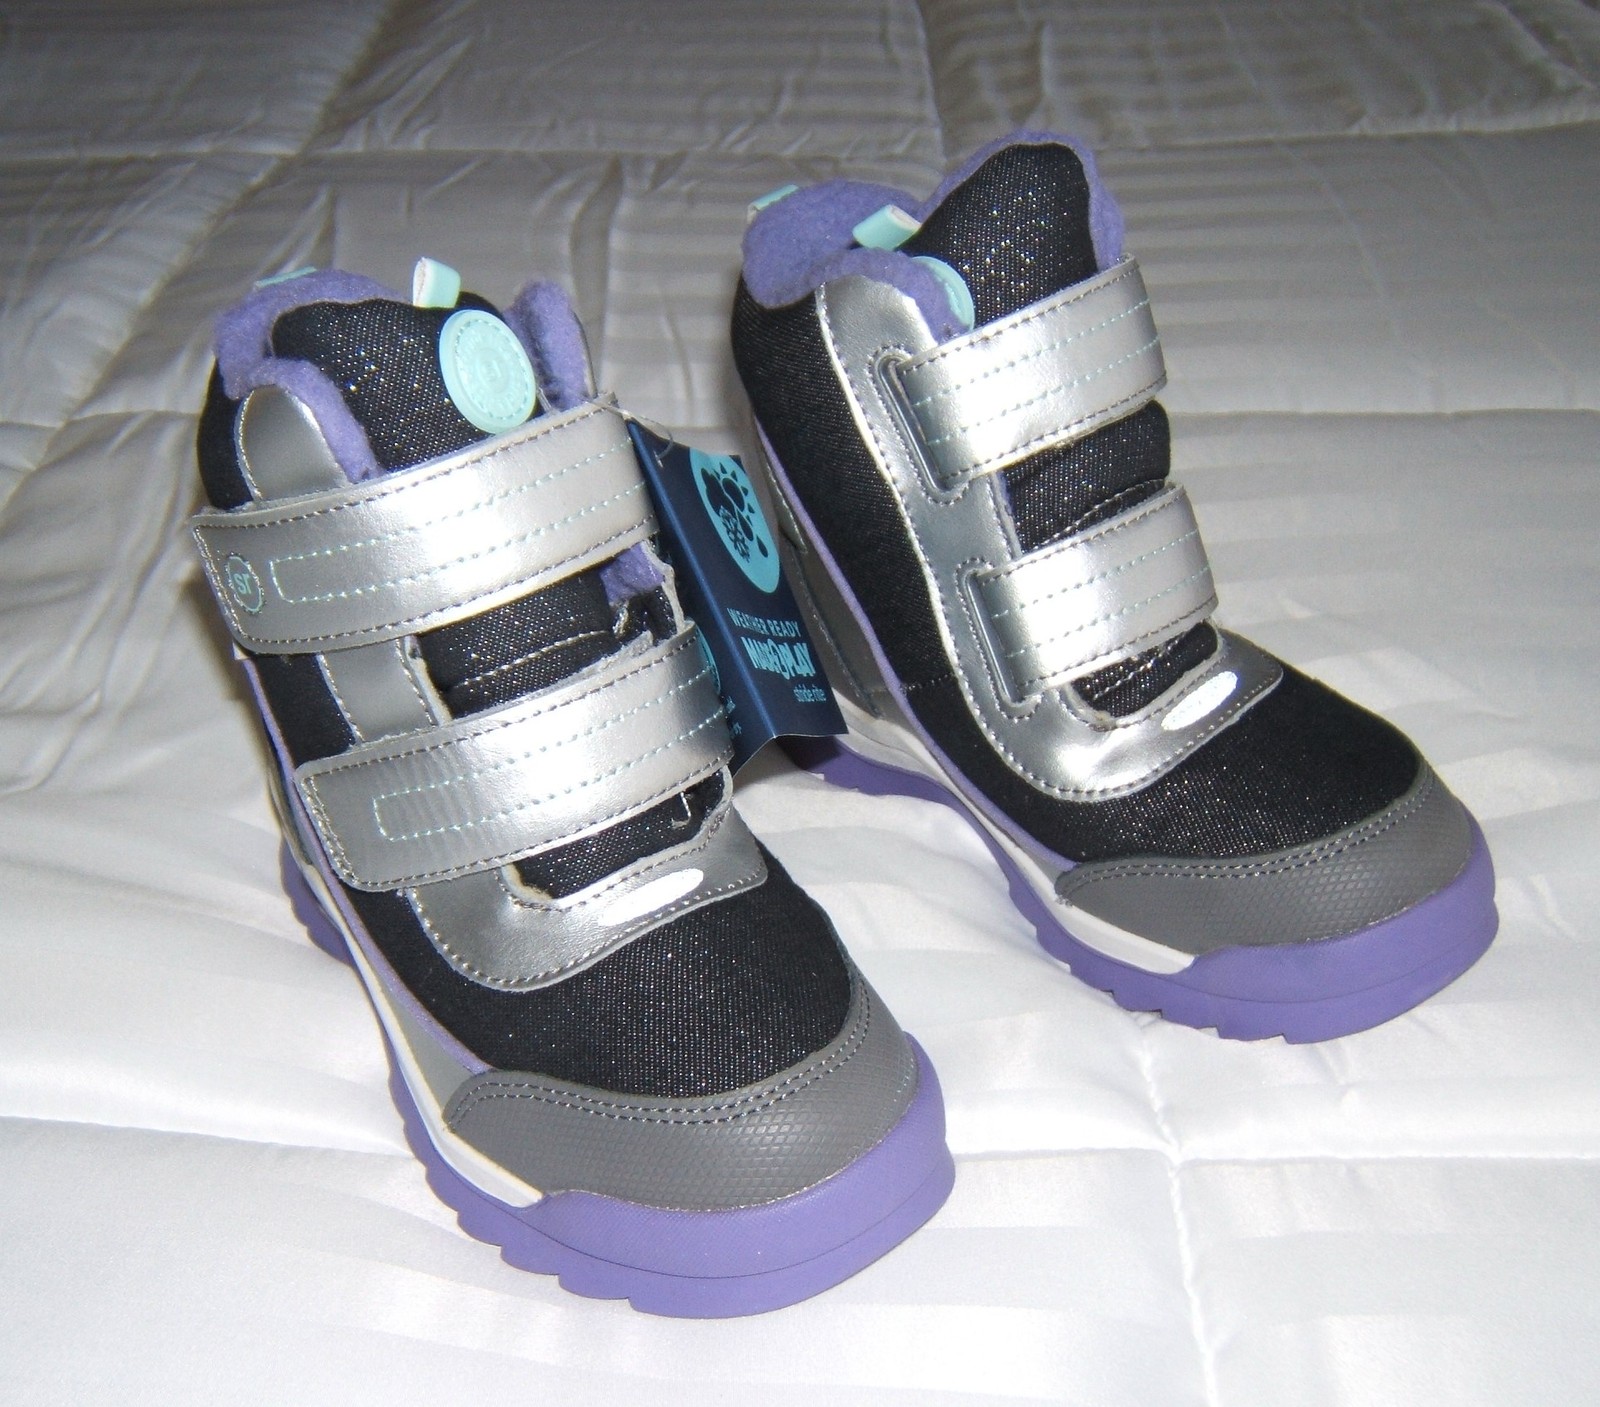 Primary image for Stride Rite Girls M2P Everest Snow Boots Size 11 M Purple Black Silver